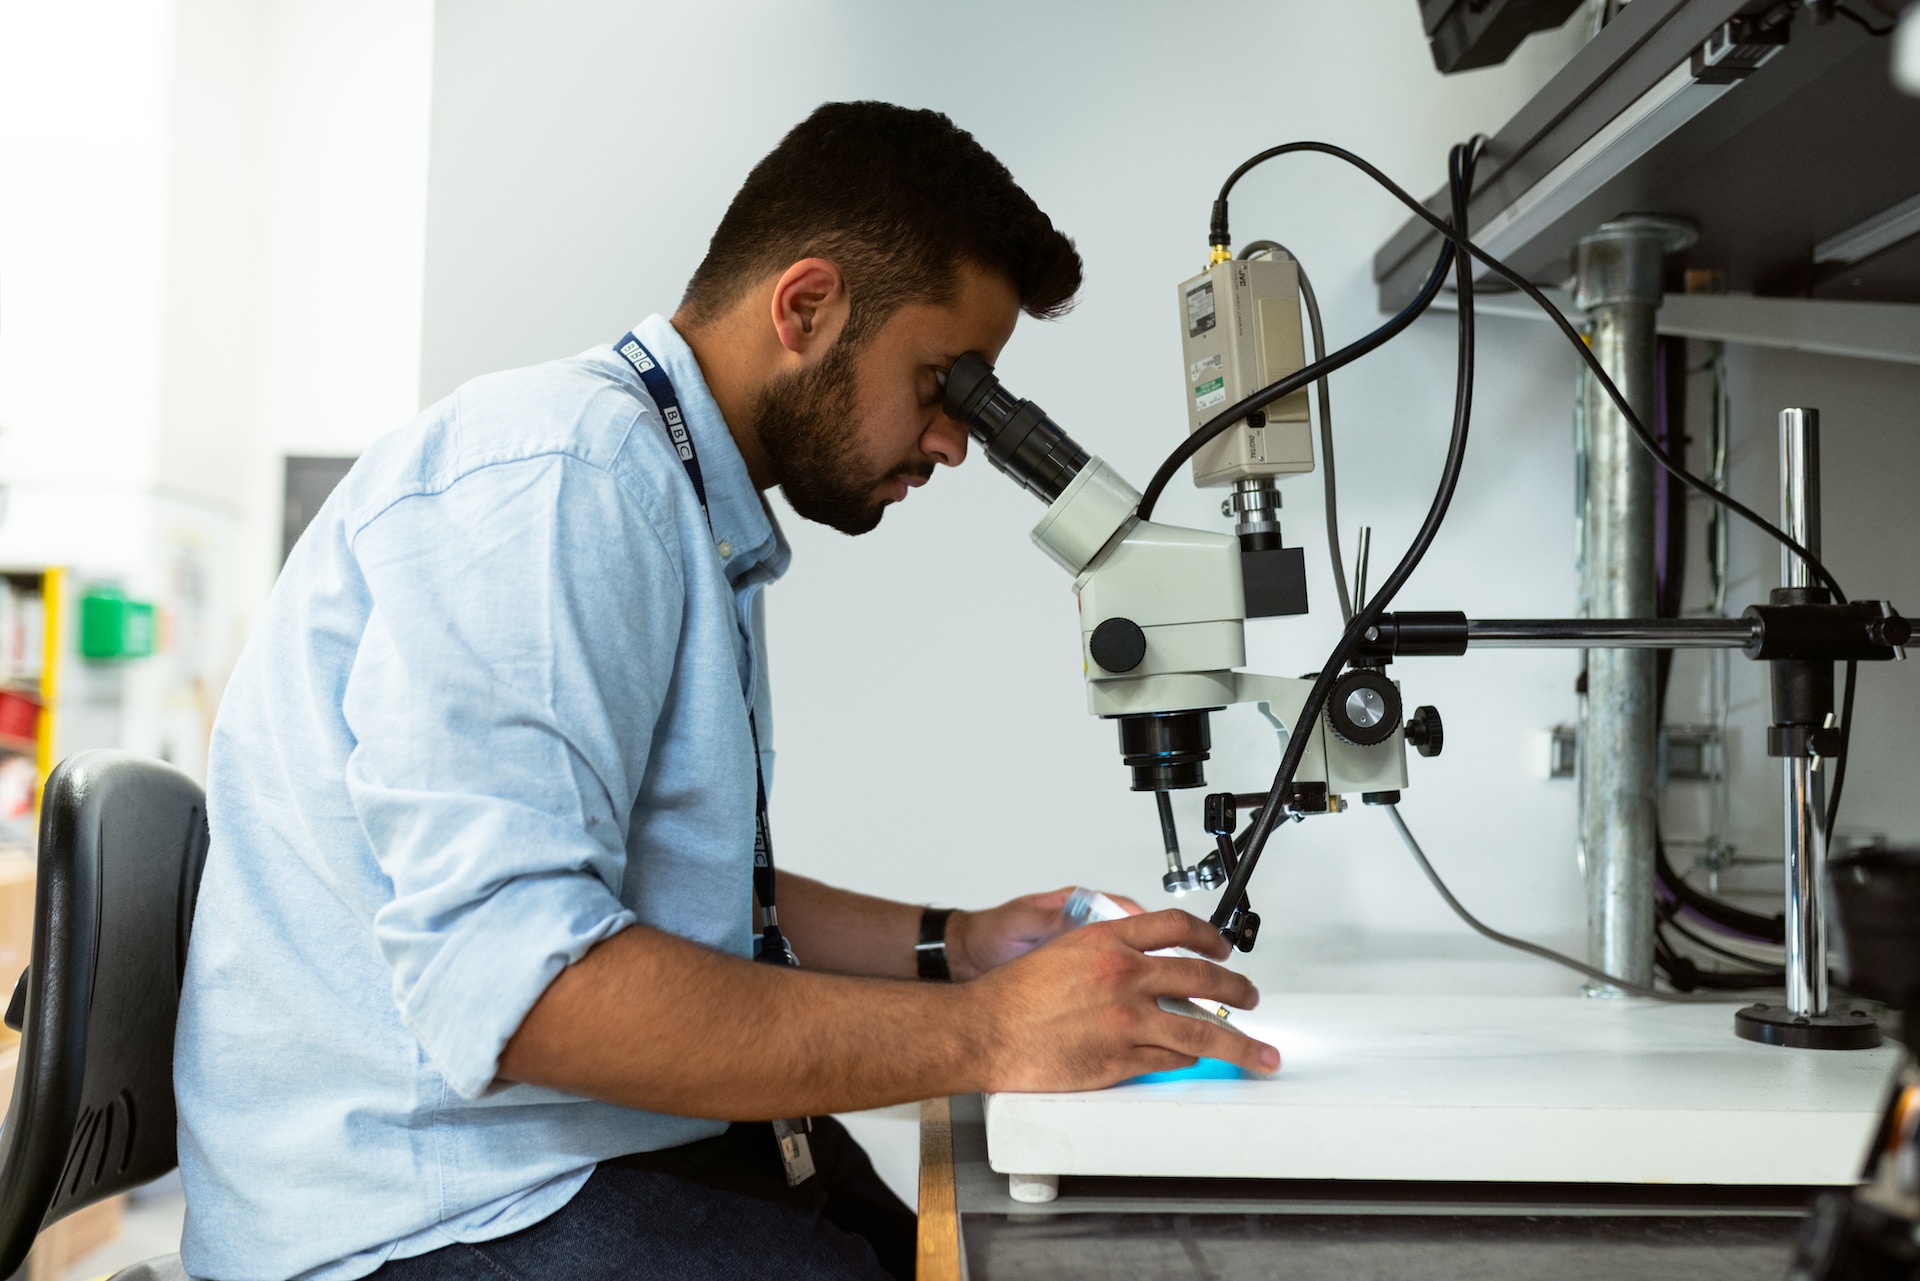 Picture of a man using a metallurgical microscope